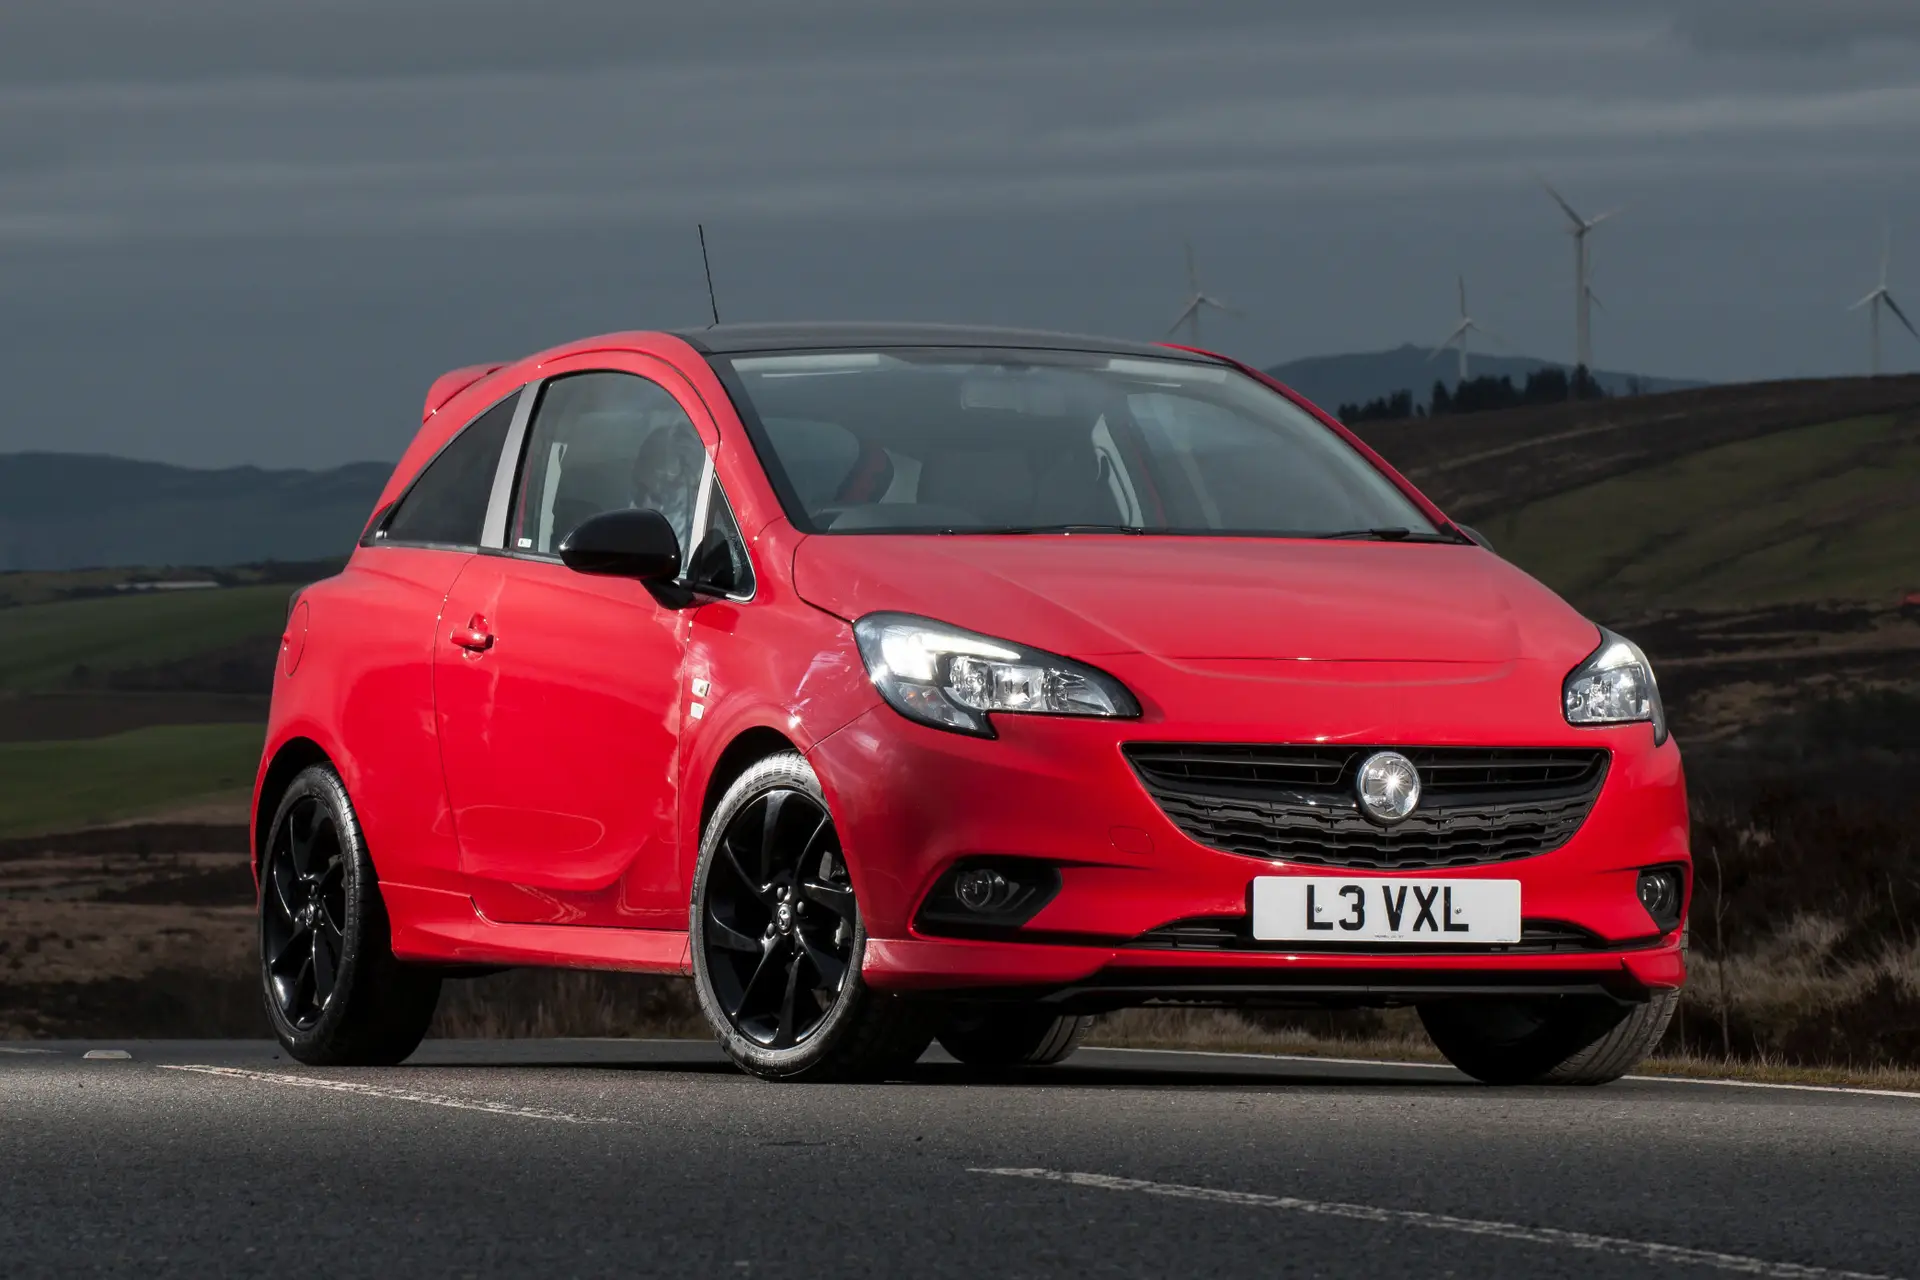 Used Vauxhall Corsa (2014-2019) Review: exterior front three quarter photo of the Vauxhall Corsa